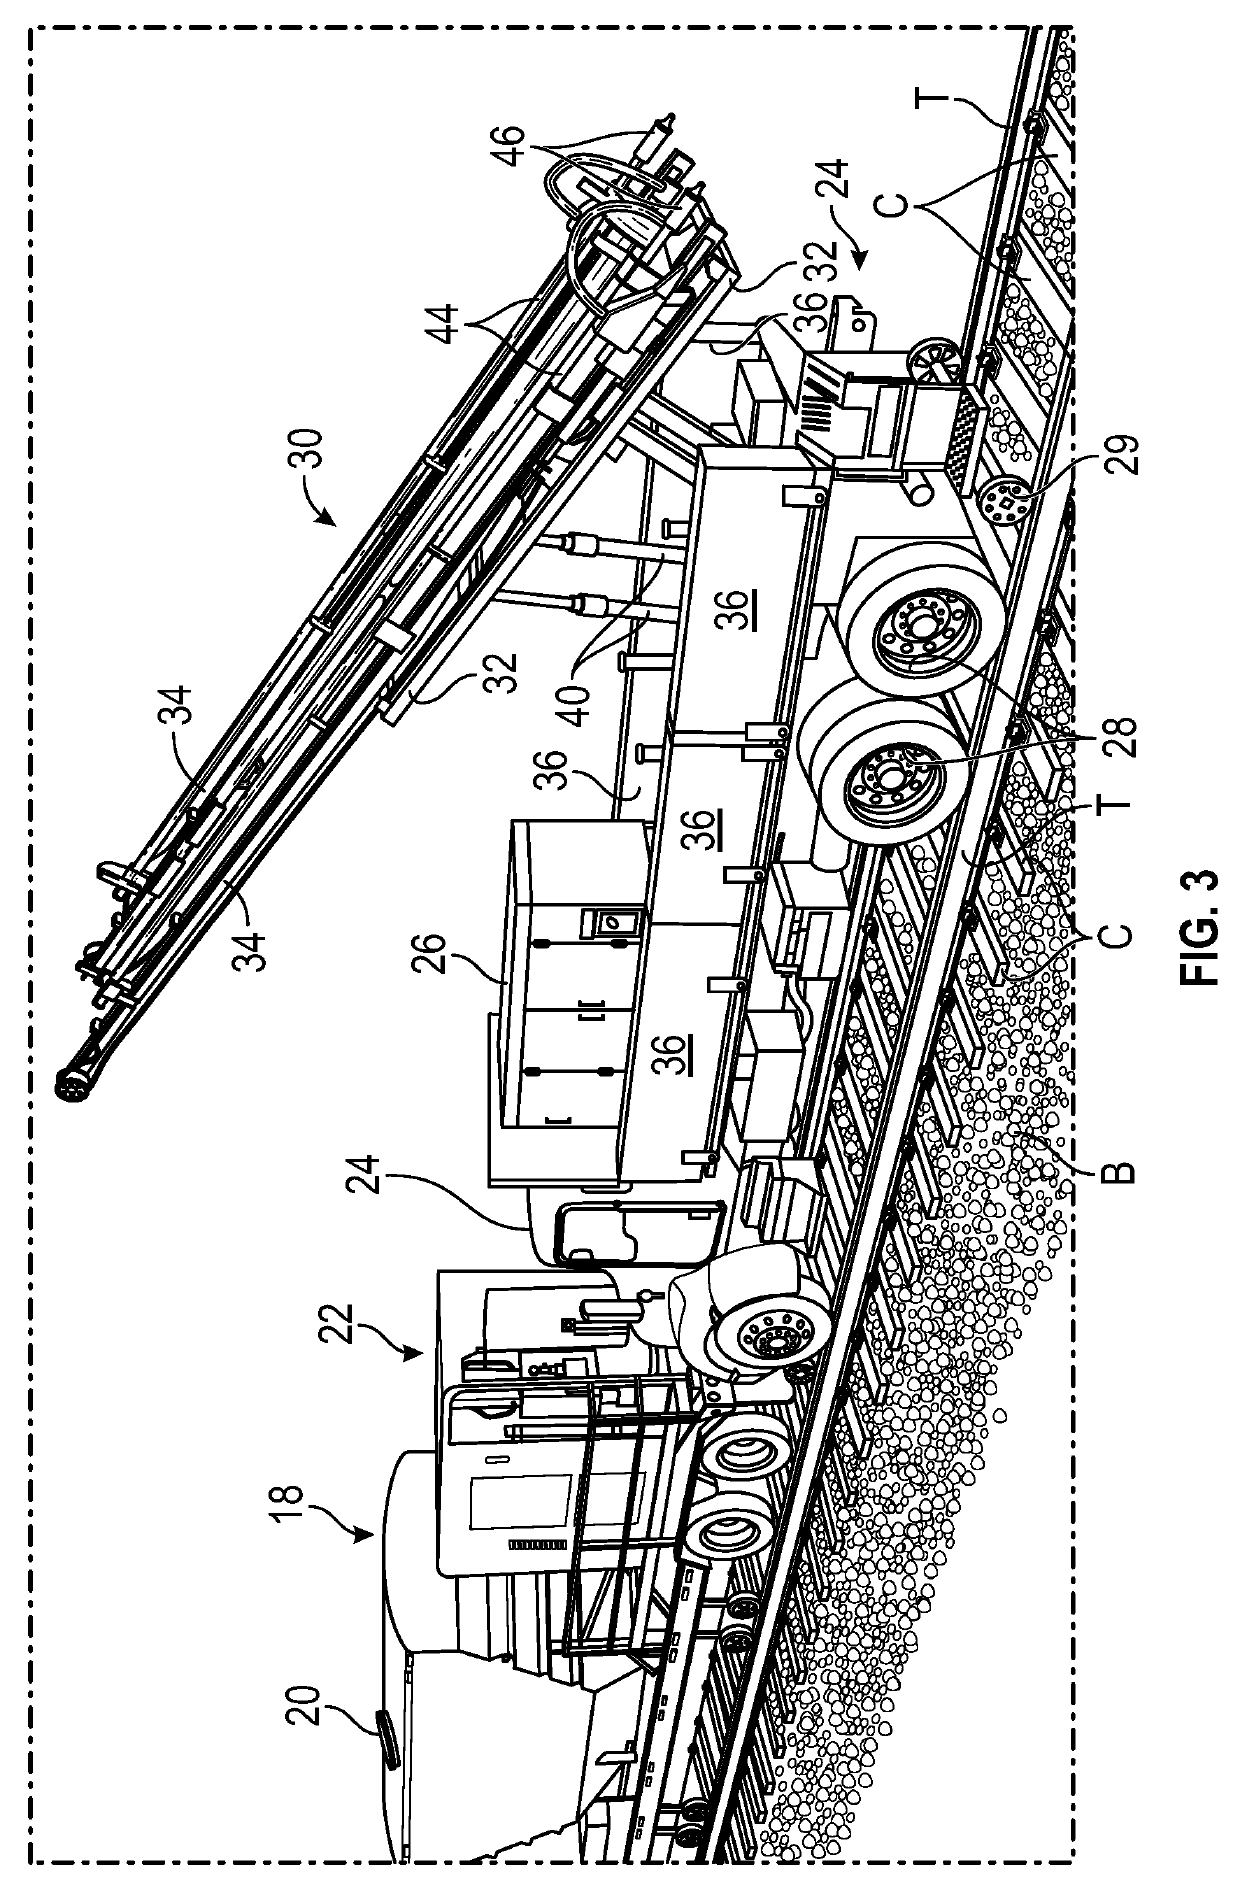 System and Method for Sub-grade Stabilization of Railroad Bed